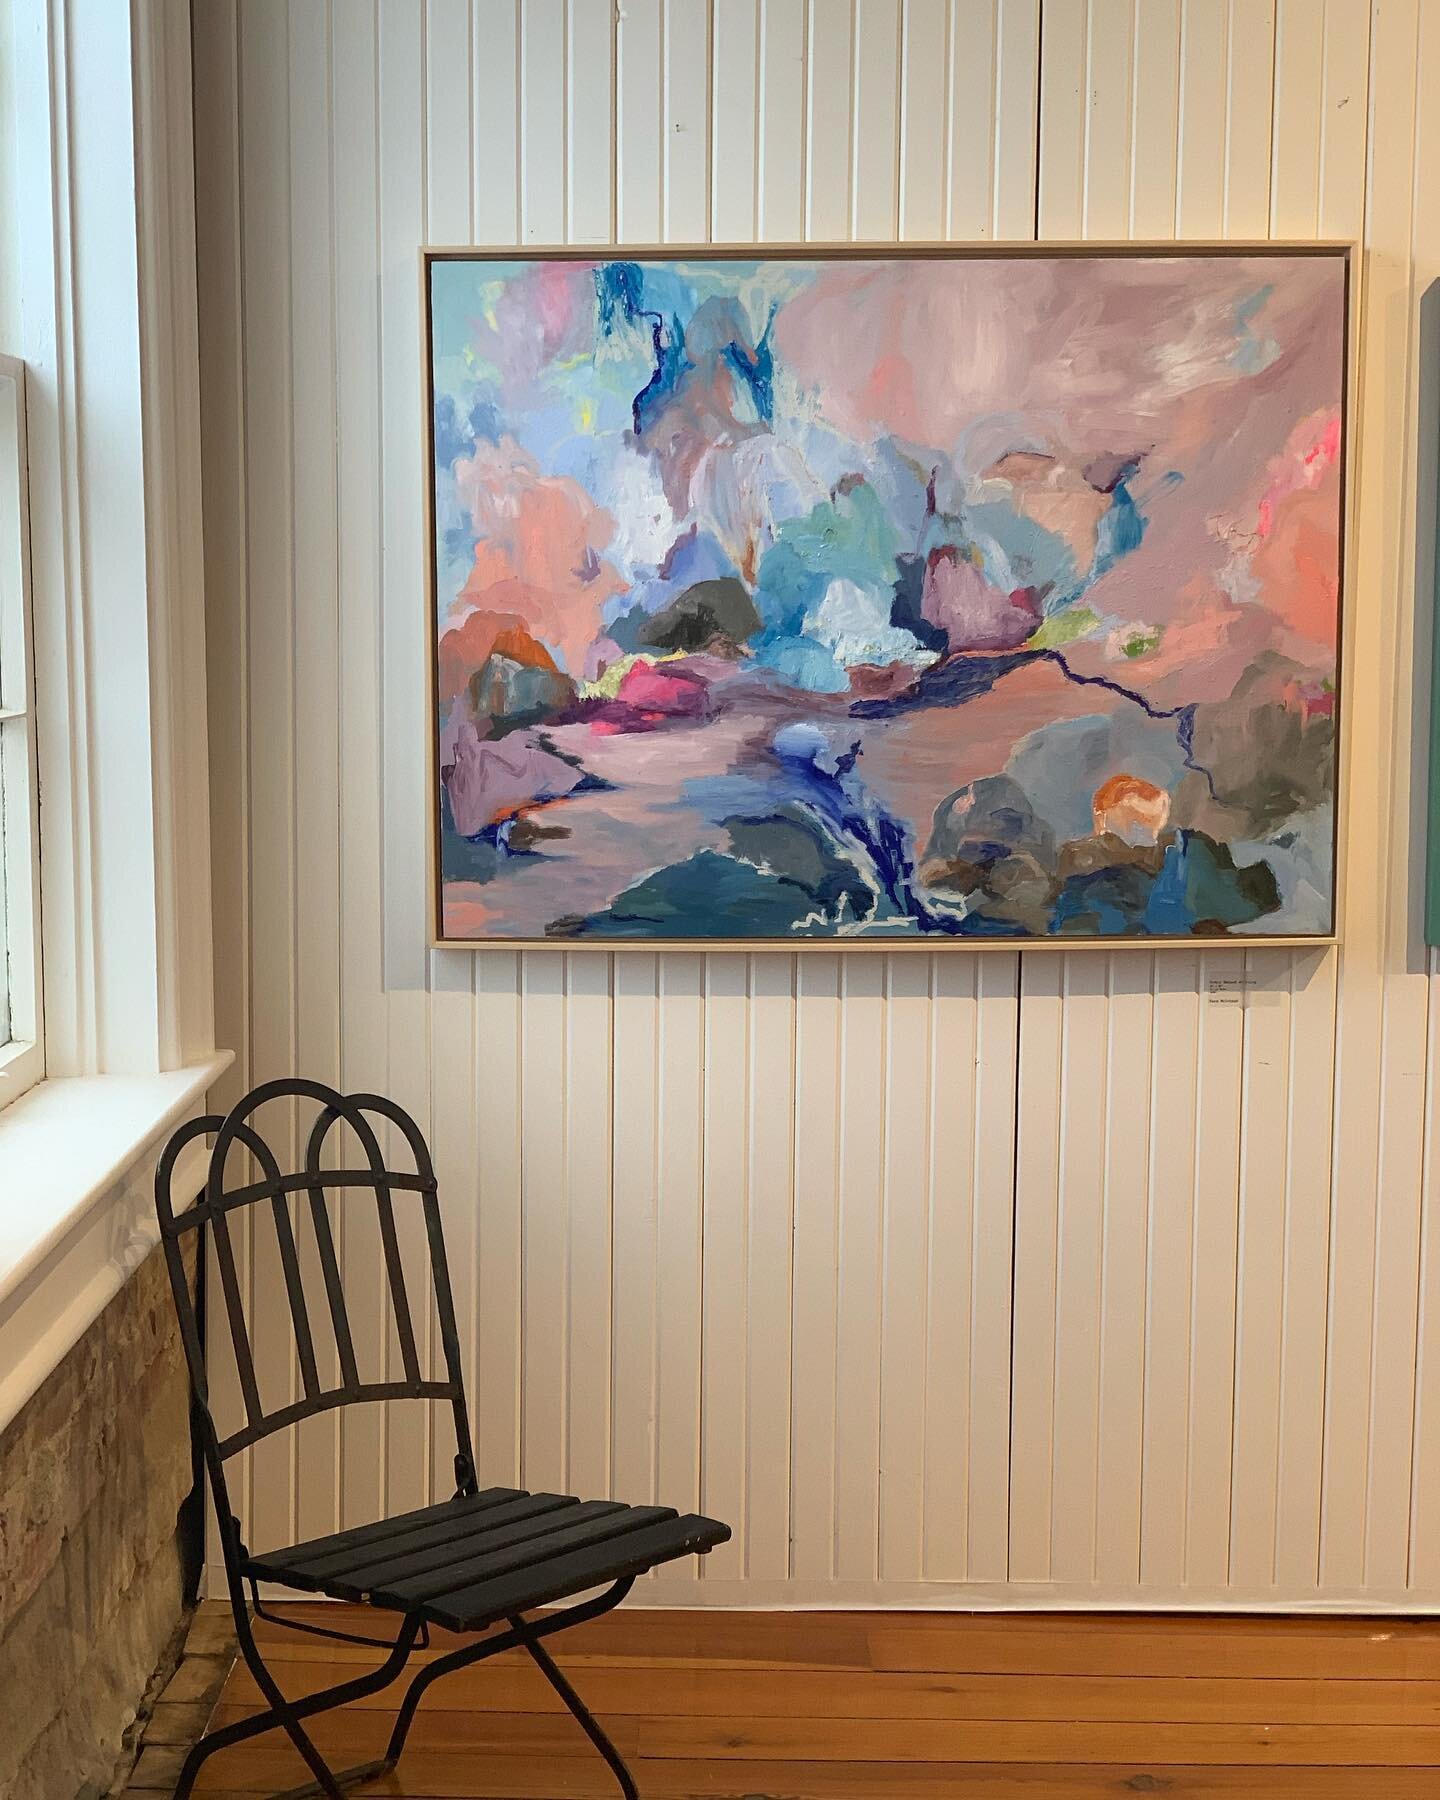 &ldquo;Every Second Arriving&rdquo;, 36x48, oil on panel, enjoying the sunshine by the window @nottawageneral this morning! 
.
Come by this week to see INSIDE OUT, a beauty of a show with @jfleetwoodmorrow @wilkins.jenn @kazjonesart @lisahannafordstu